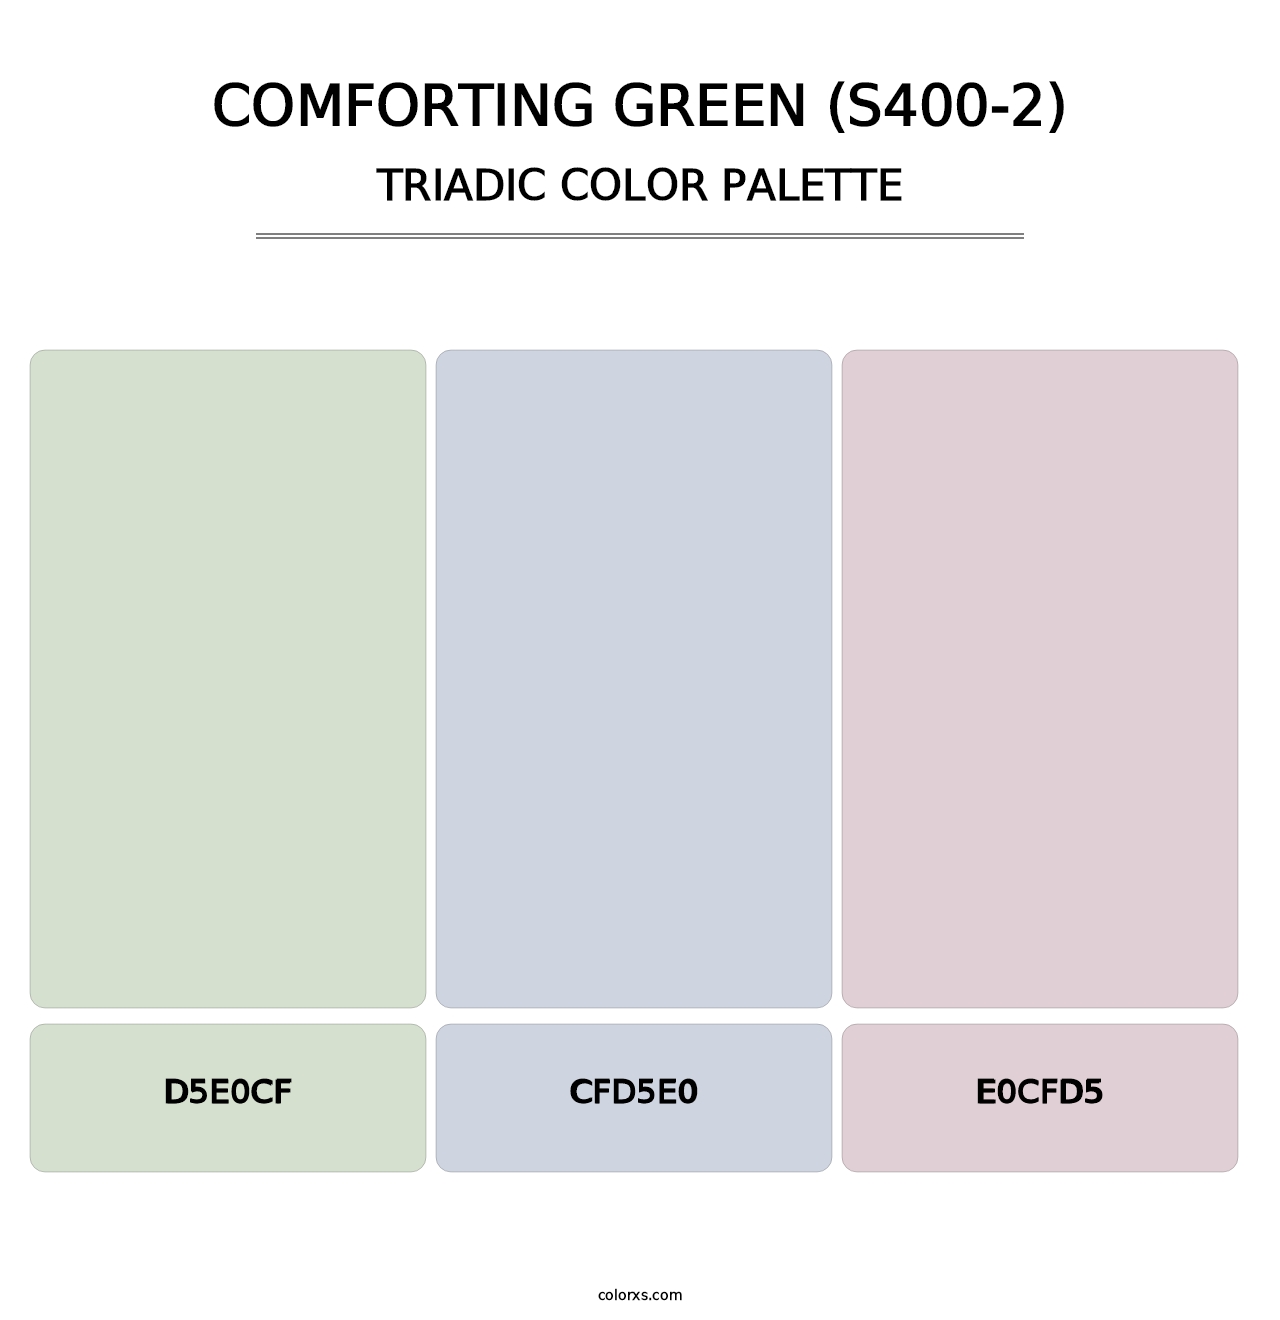 Comforting Green (S400-2) - Triadic Color Palette